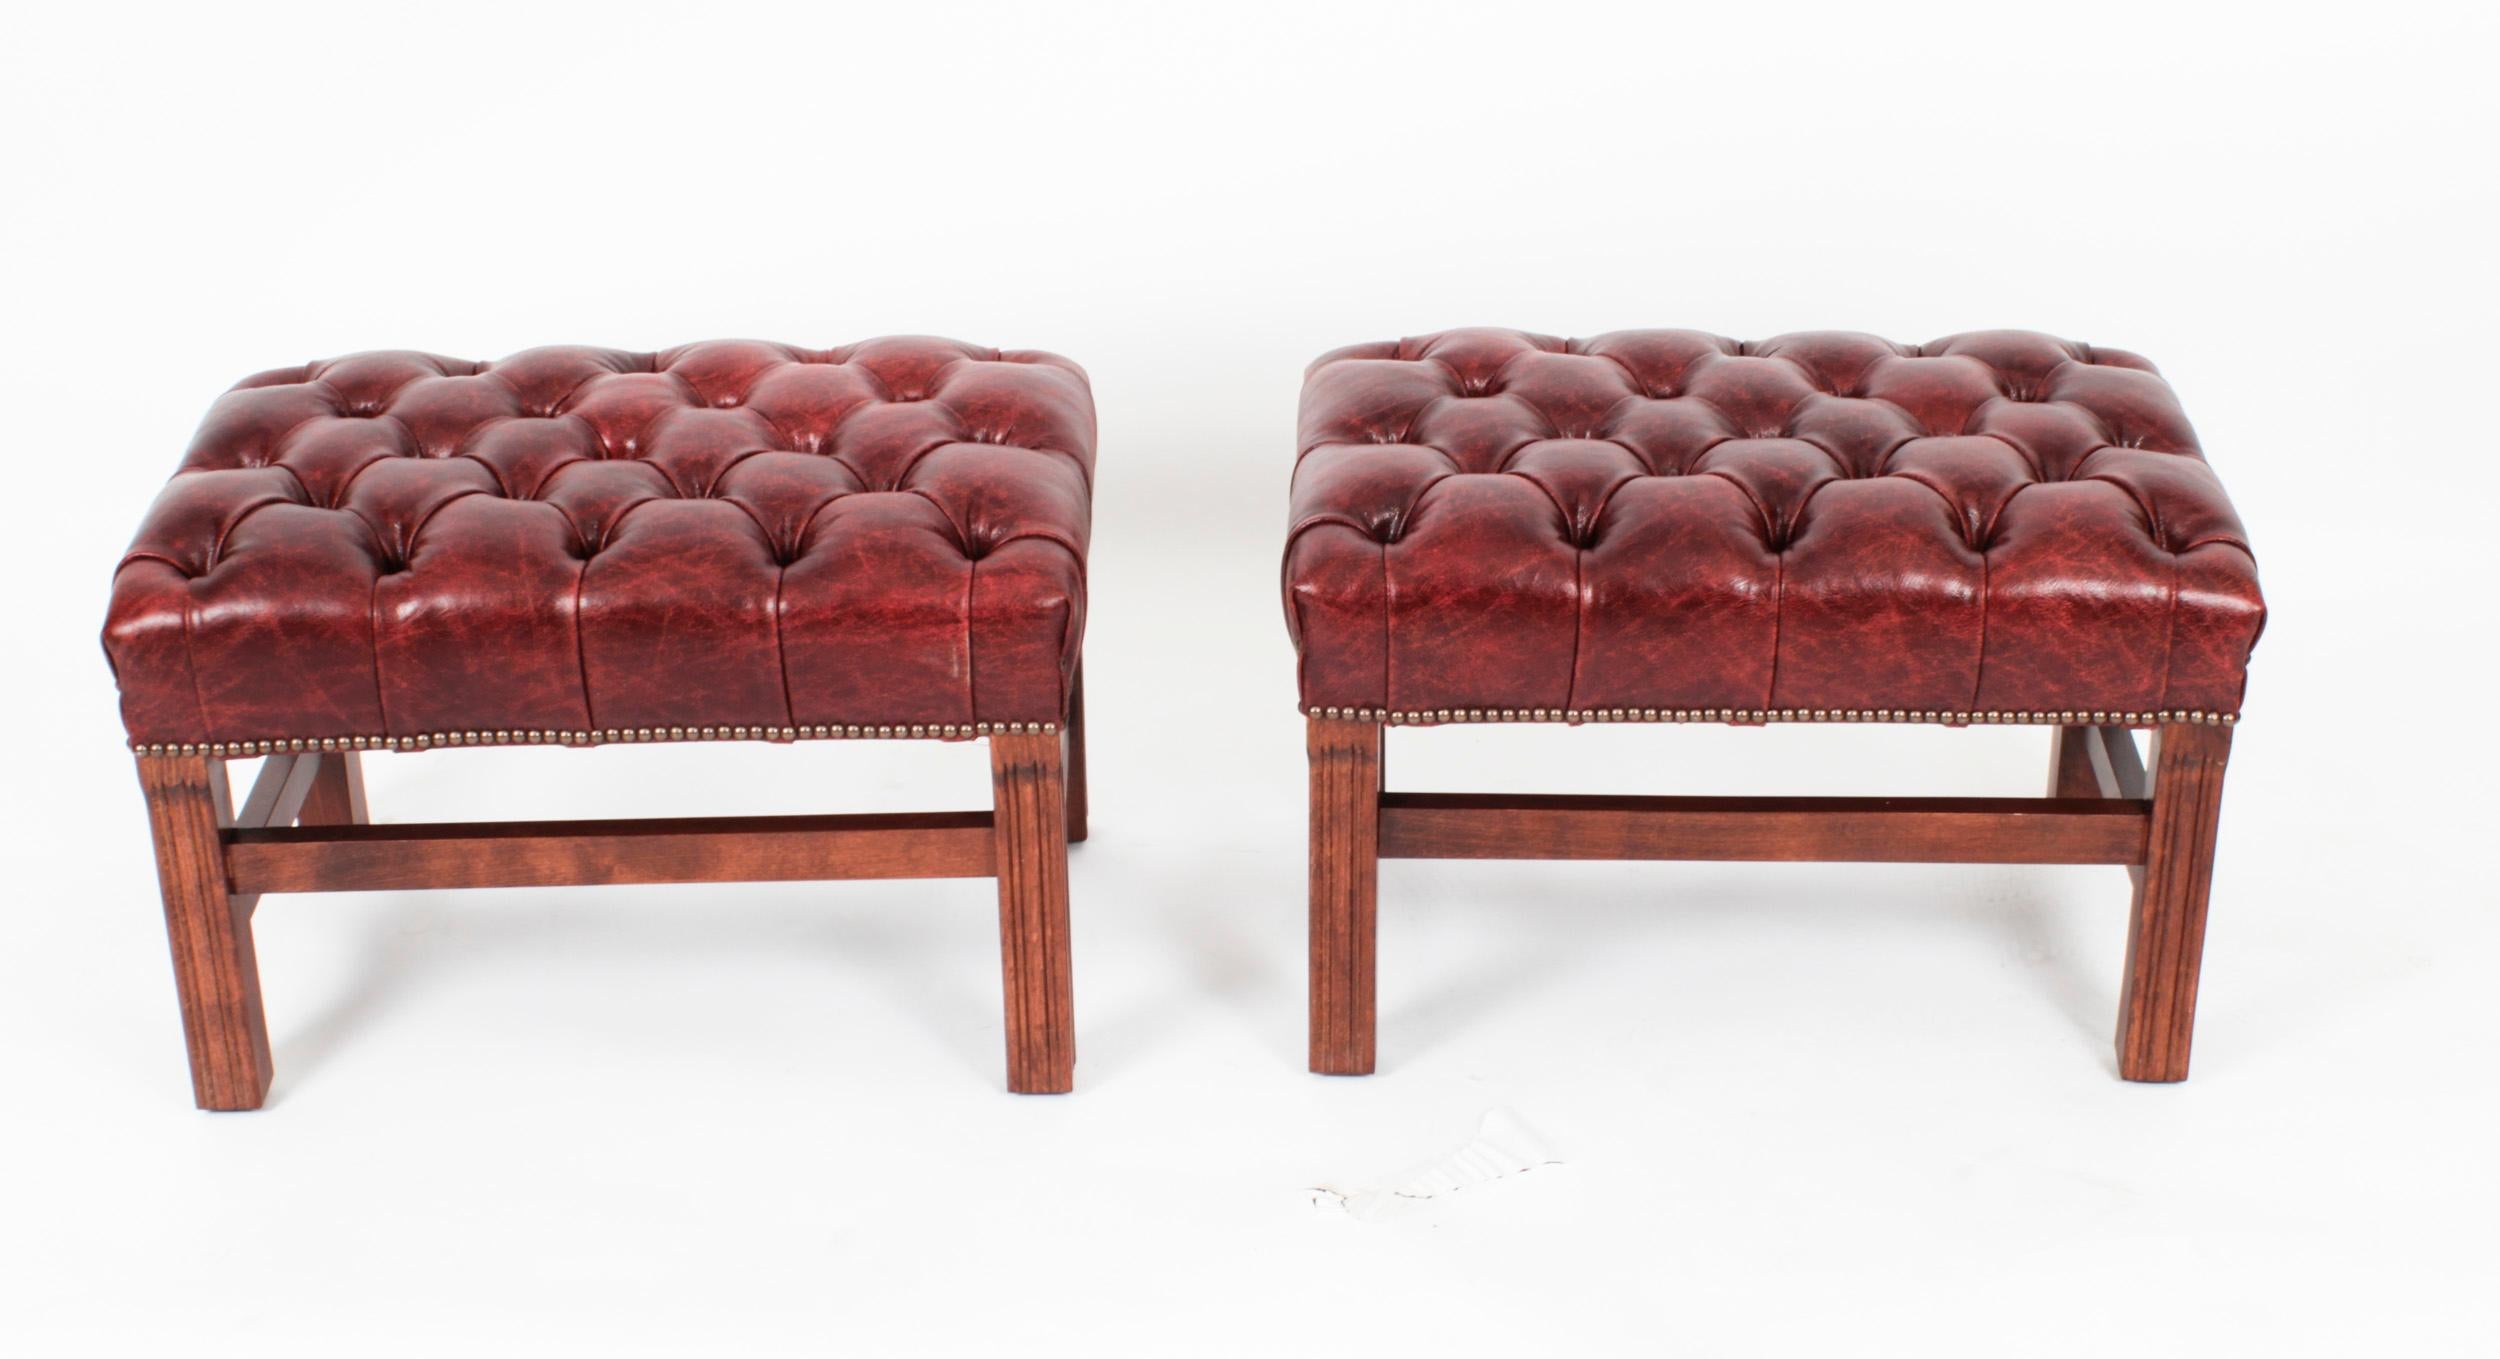 This is a very handsome bespoke pair of leather stools in crimson leather, the colour is called Murano Port.

They feature fantastic beautiful sumptuous buttoned leather upholstery and are raised on square tapering legs joined by H